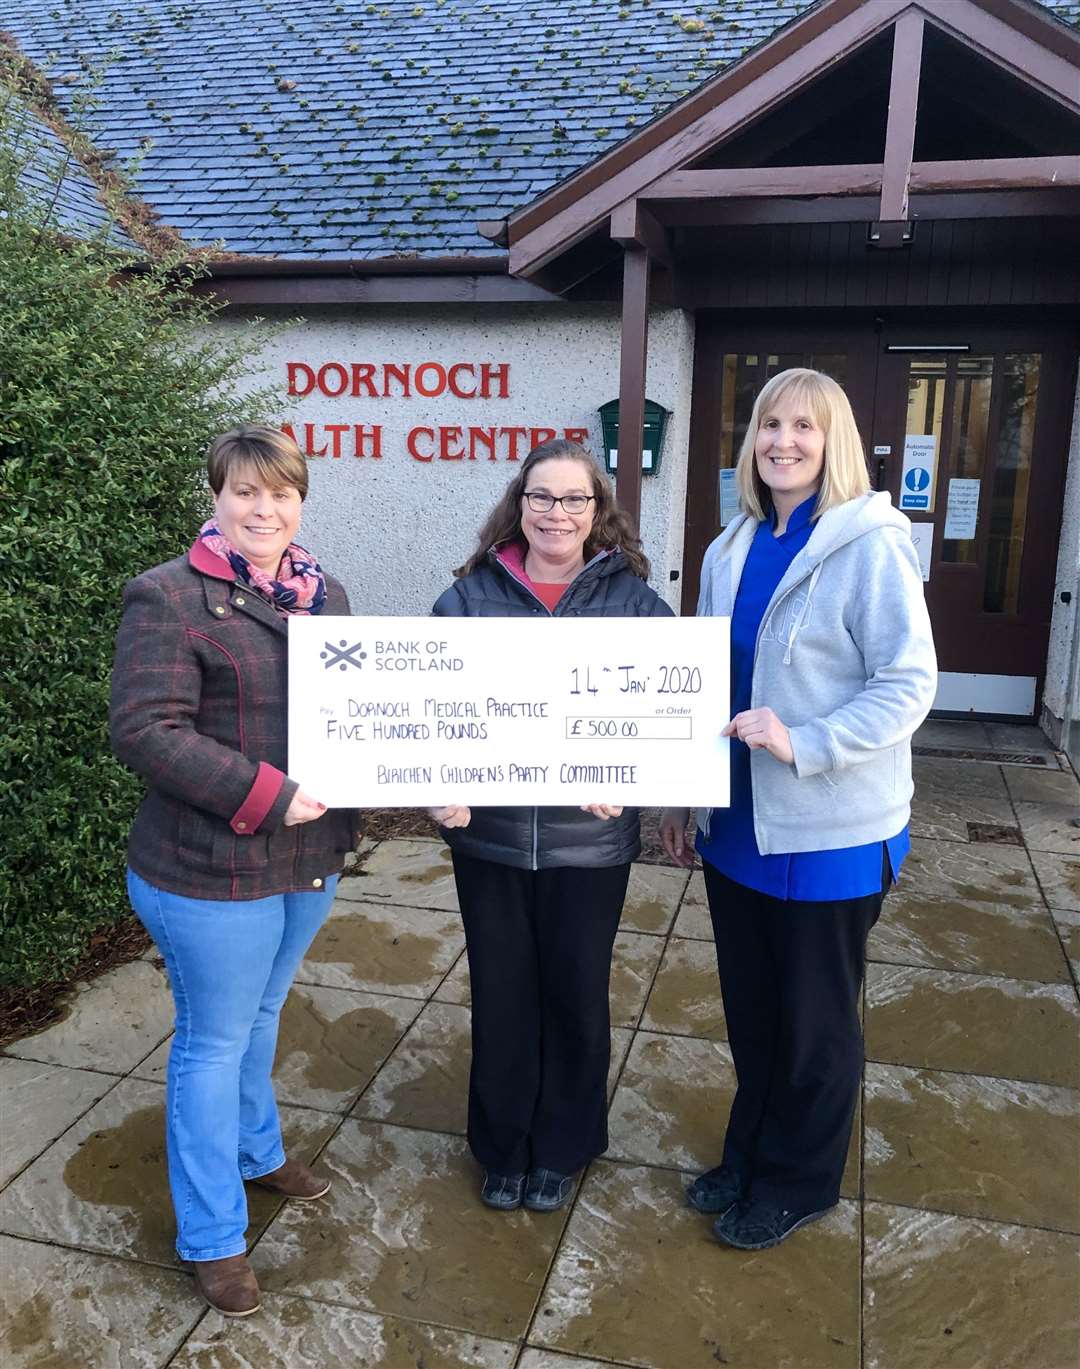 Dr Elizabeth Campbell (centre) of Dornoch Medical Practice was presented with the £500 cheque by children’s party committee treasurer Tiffany Fraser (left) and secretary Julie Ross.